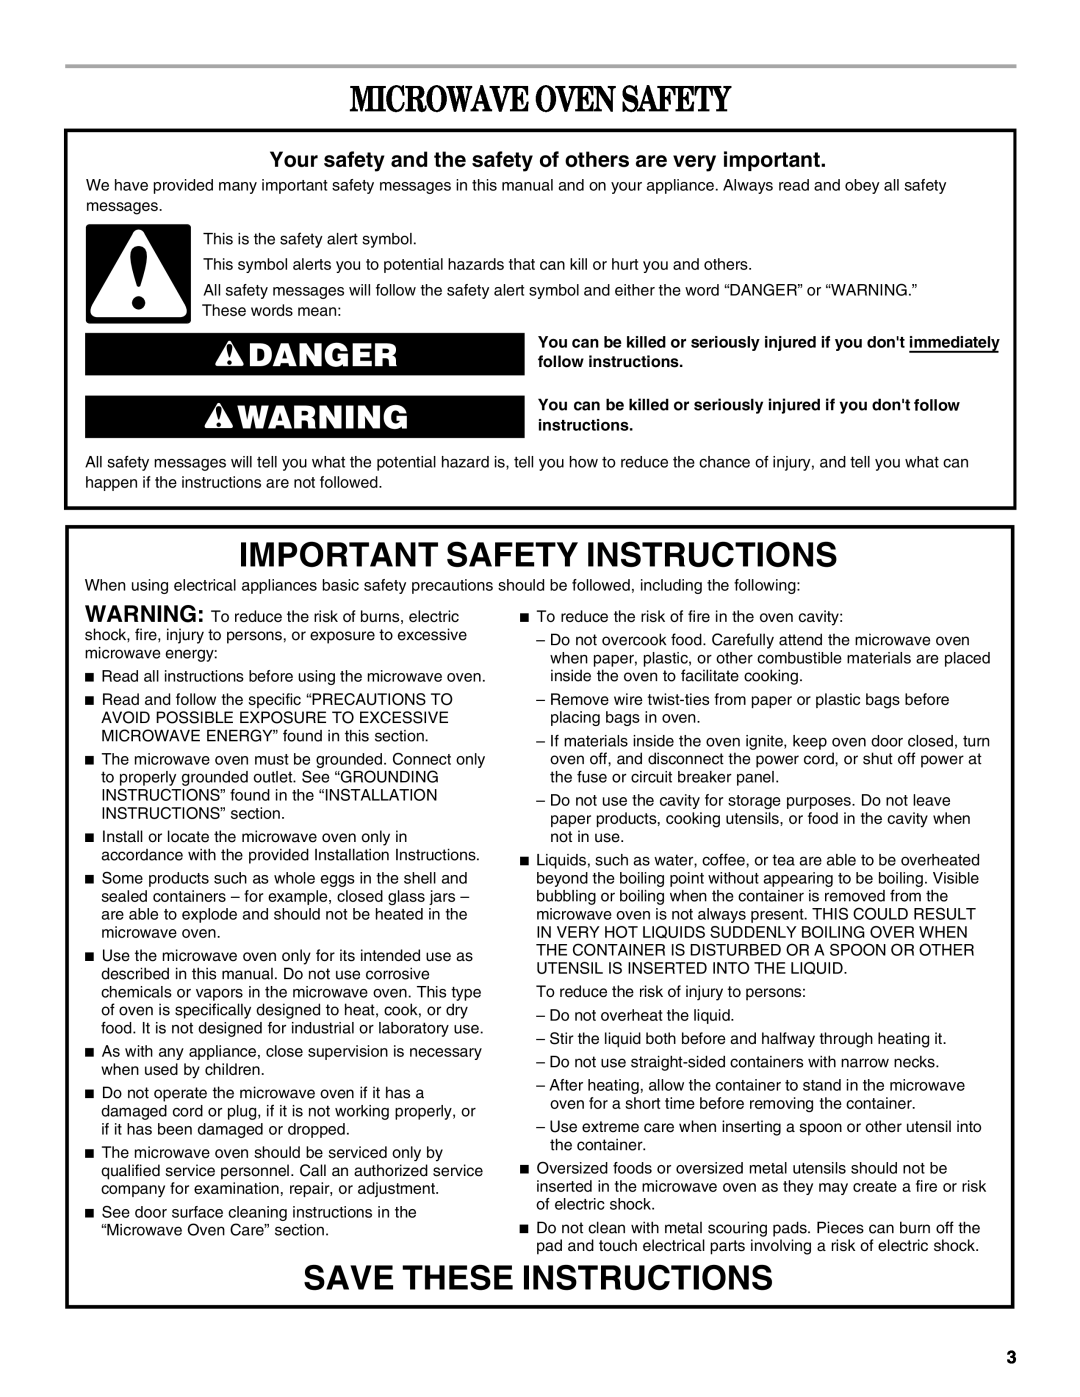 Whirlpool WMC10511AB manual Microwave Oven Safety, Important Safety Instructions, Save These Instructions, Danger 